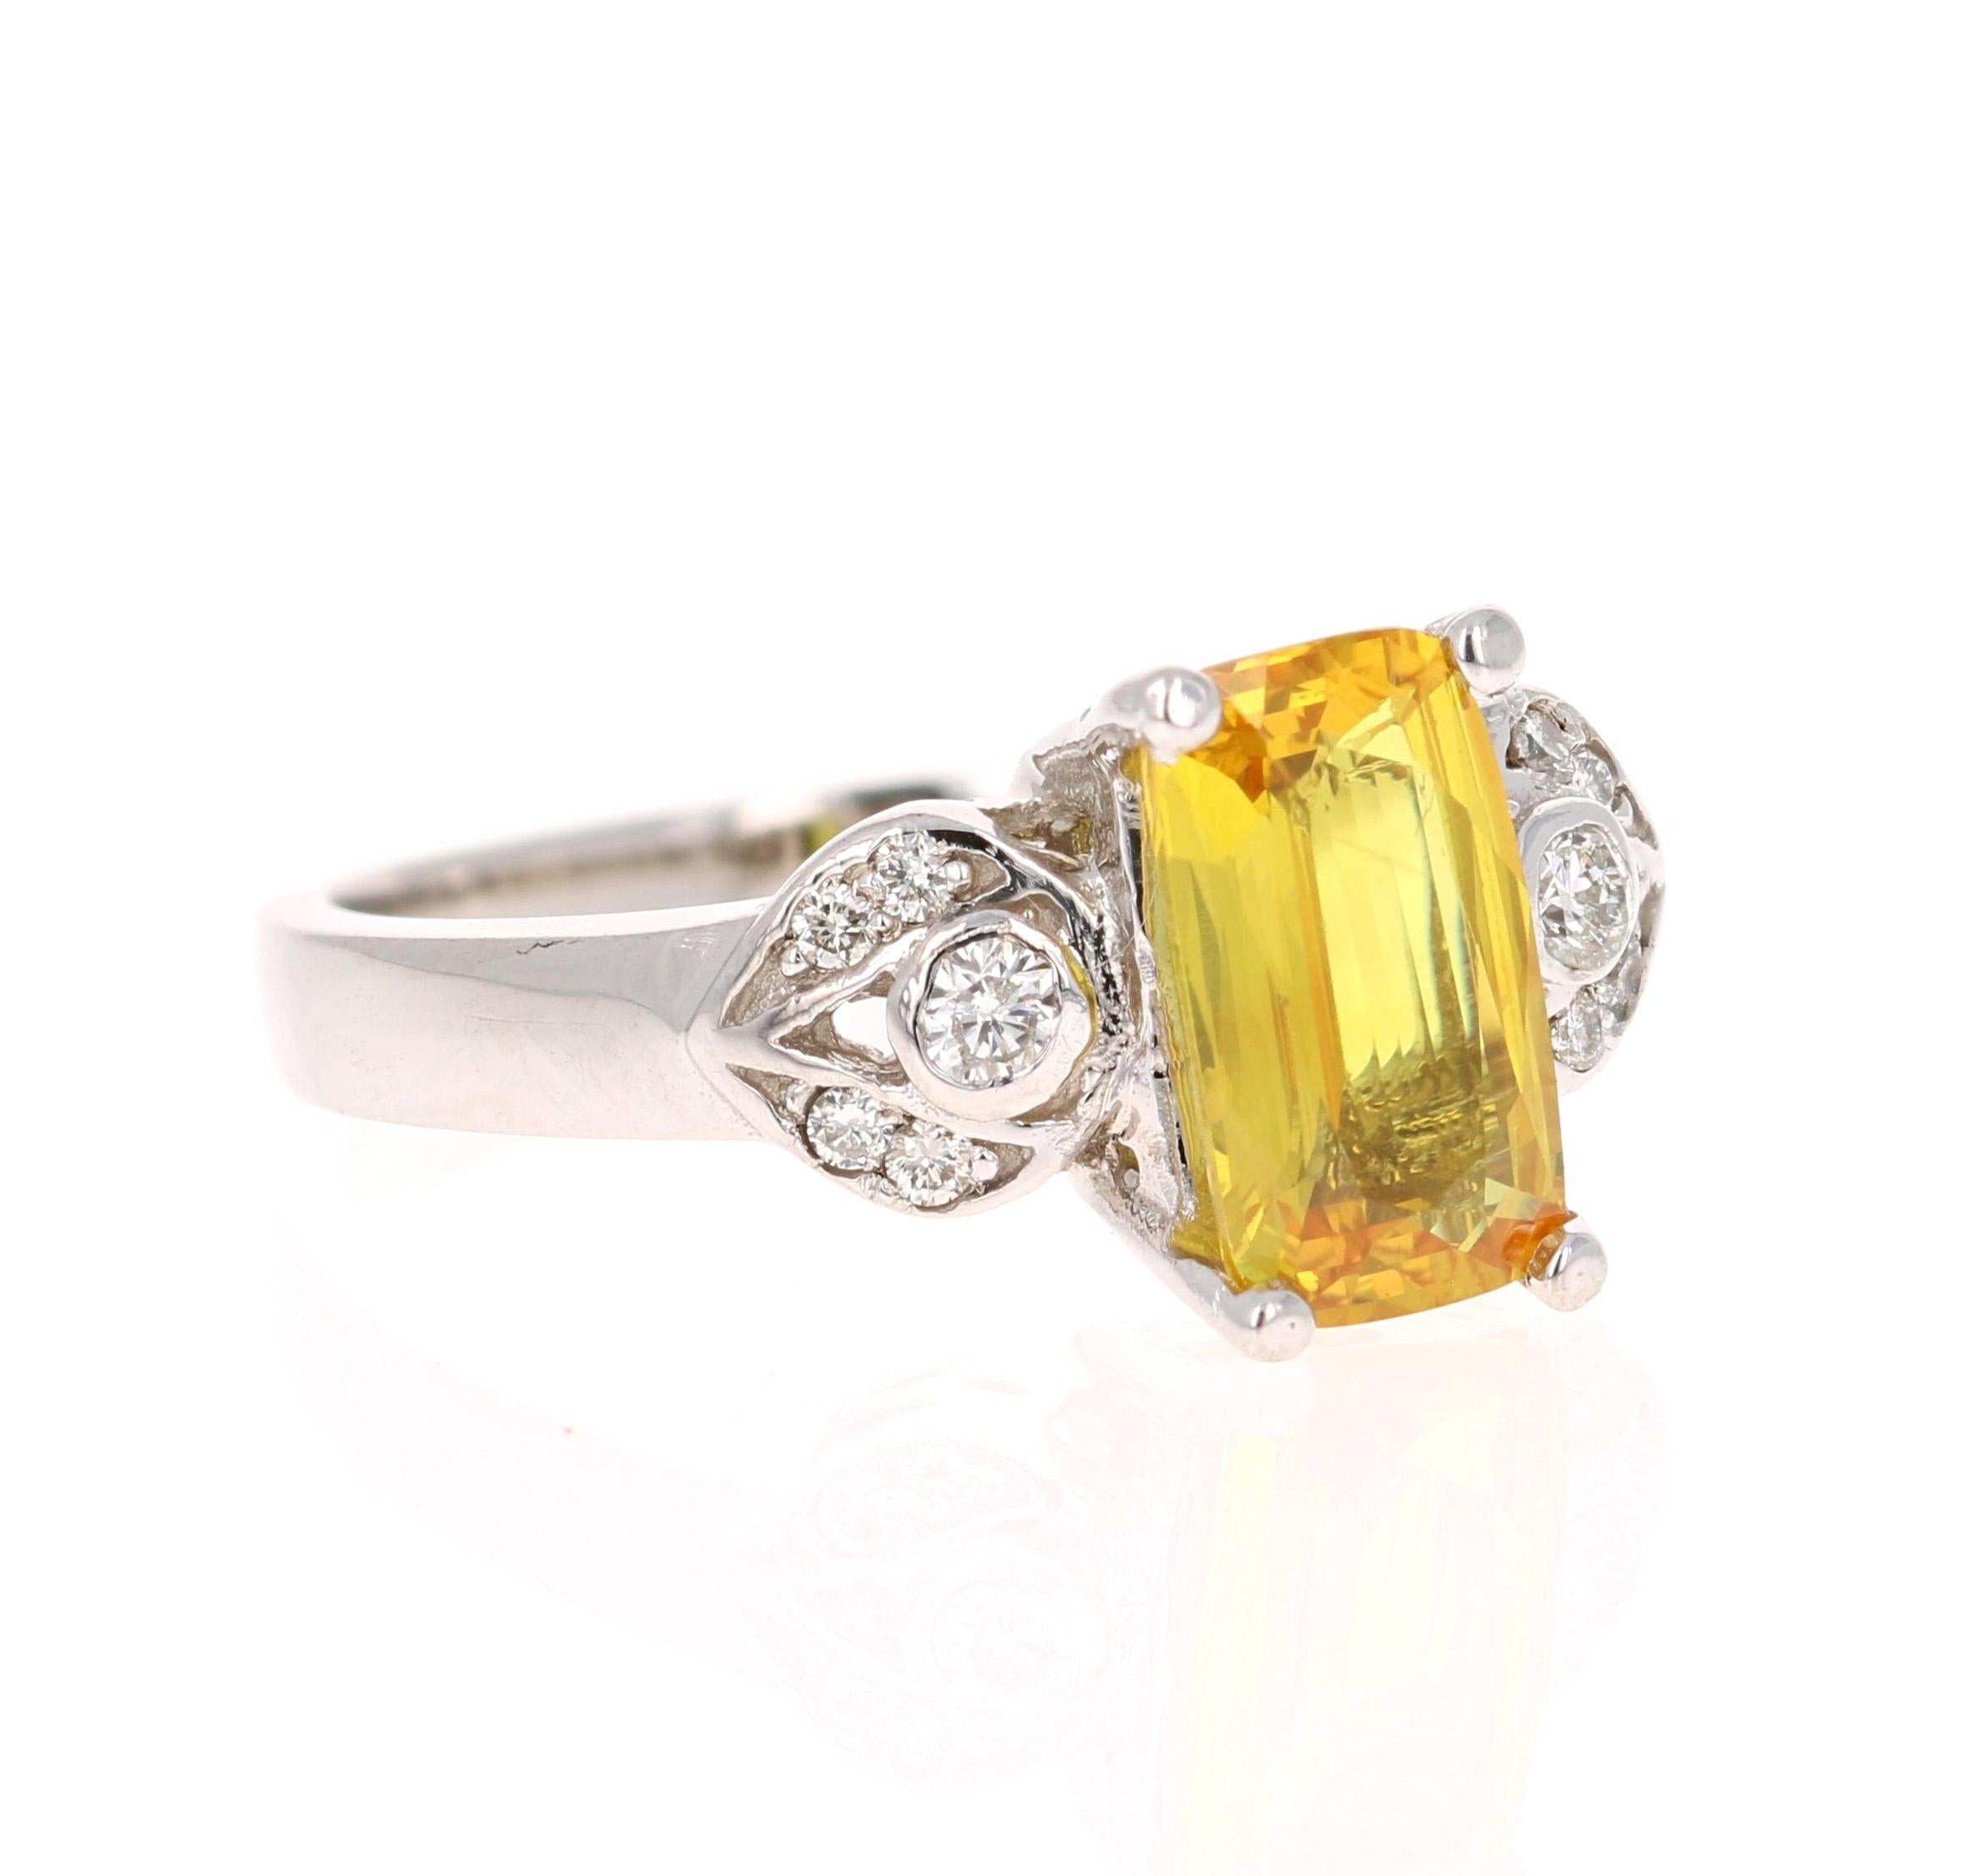 This beautiful ring has a Emerald Cut Yellow Sapphire that weighs 1.94 Carats. It is surrounded by 10 Round Cut Diamonds that weigh 0.17 Carats. (Clarity: VS, Color: H) 
The Yellow Sapphire measures at 7 mm x 8 mm and has indications of heating.